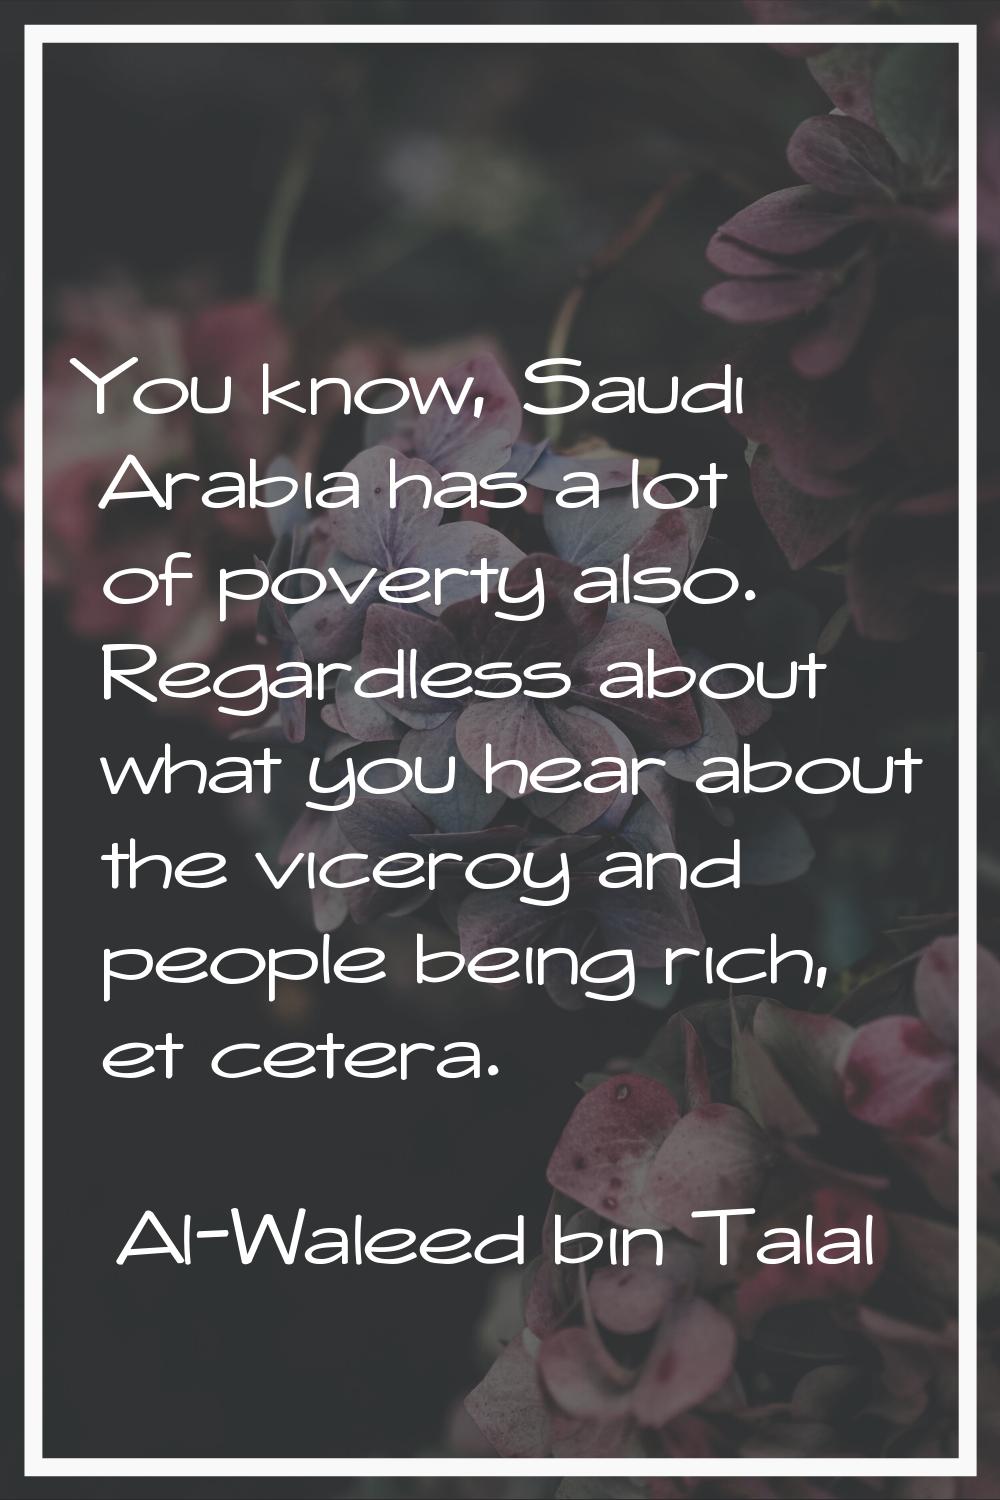 You know, Saudi Arabia has a lot of poverty also. Regardless about what you hear about the viceroy 